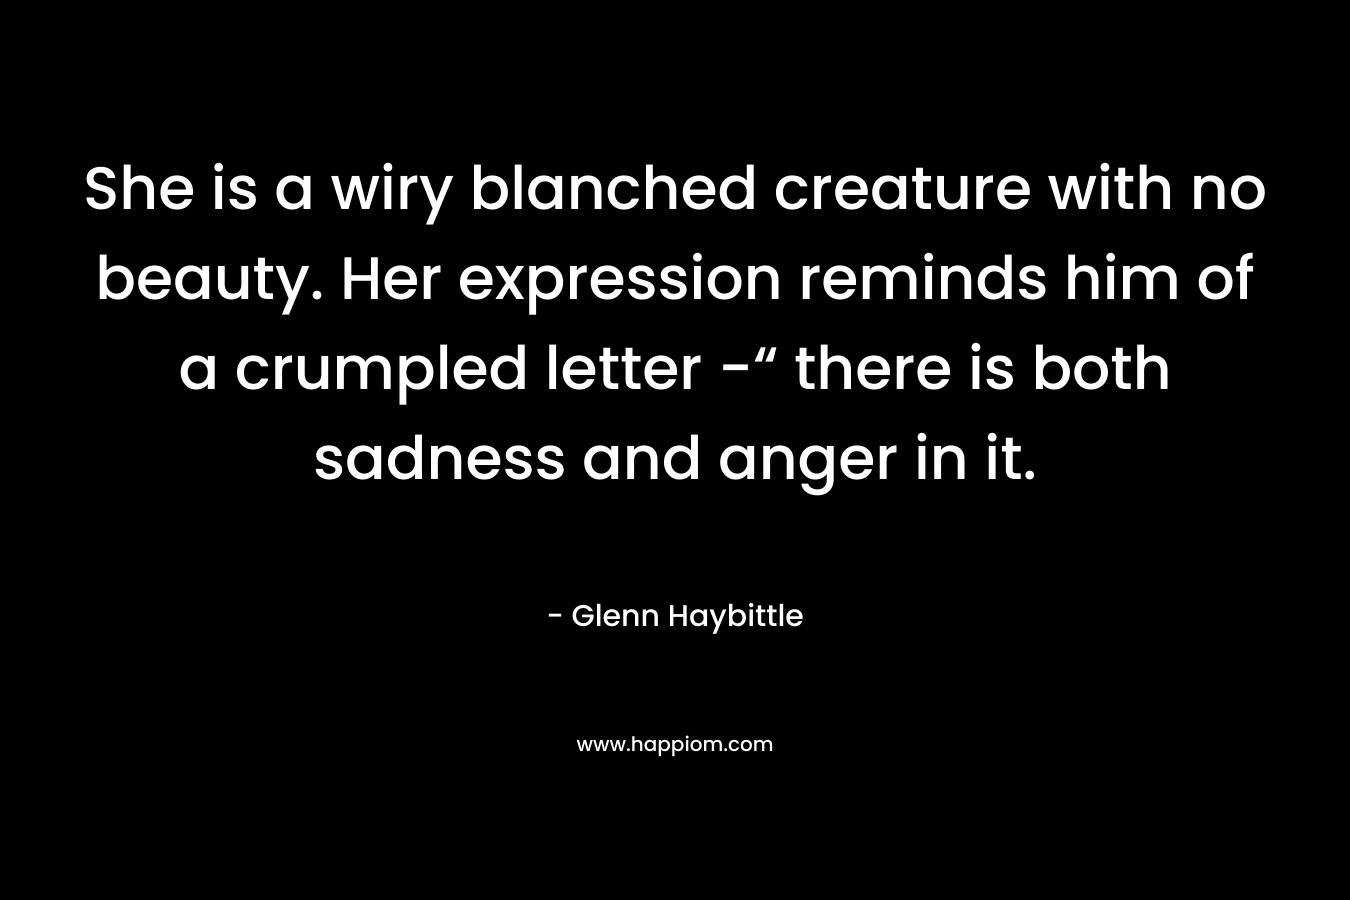 She is a wiry blanched creature with no beauty. Her expression reminds him of a crumpled letter -“ there is both sadness and anger in it. – Glenn Haybittle